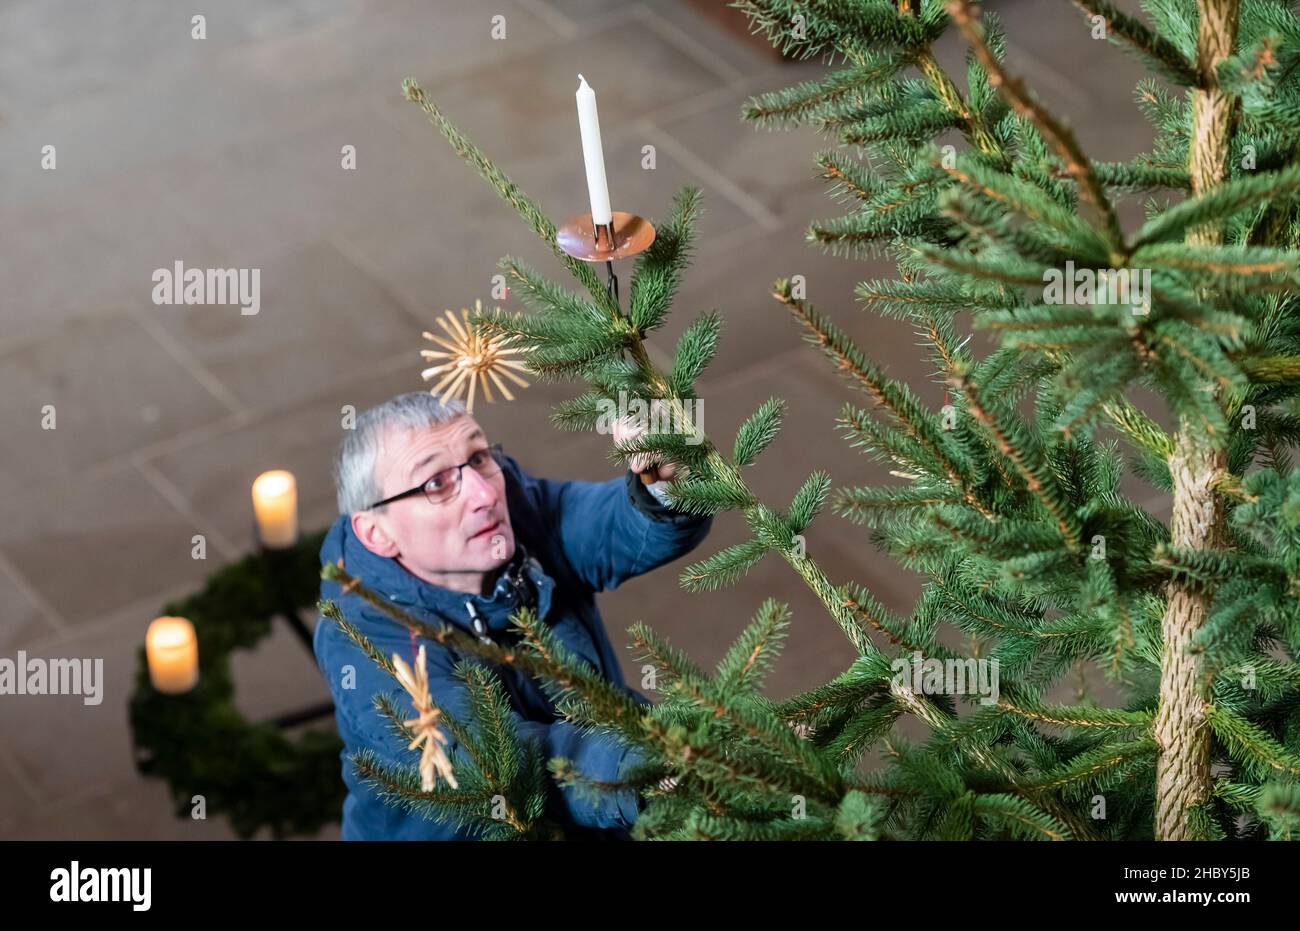 22 December 2021, Saxony, Meißen: Cathedral chaplain Stephan Kühne decorates the Christmas tree in the altar area of Meissen Cathedral on Albrechtsburg Castle. Construction of the Gothic church began at the end of the 13th century. Photo: Matthias Rietschel/dpa-Zentralbild/ZB Stock Photo